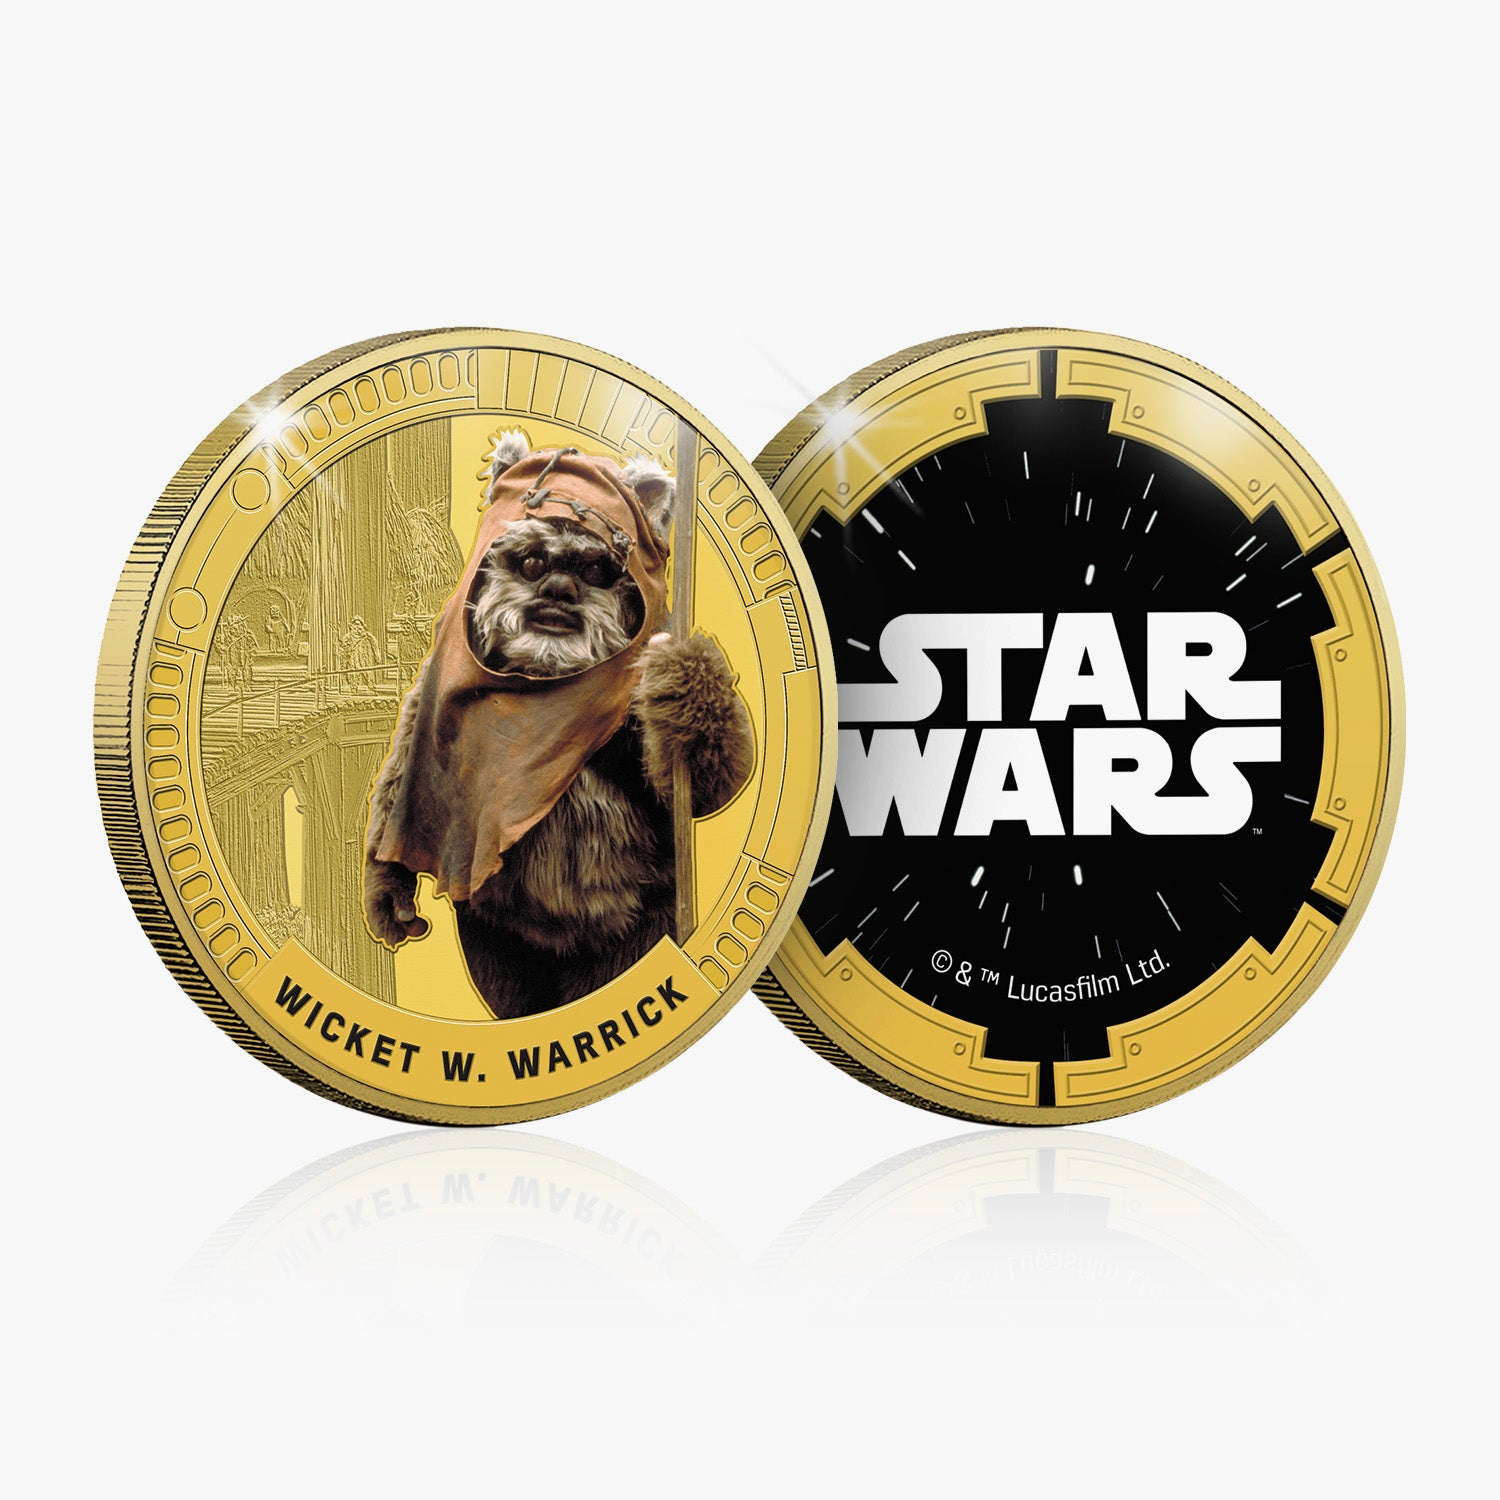 Wicket W. Warrick Gold - Plated Commemorative